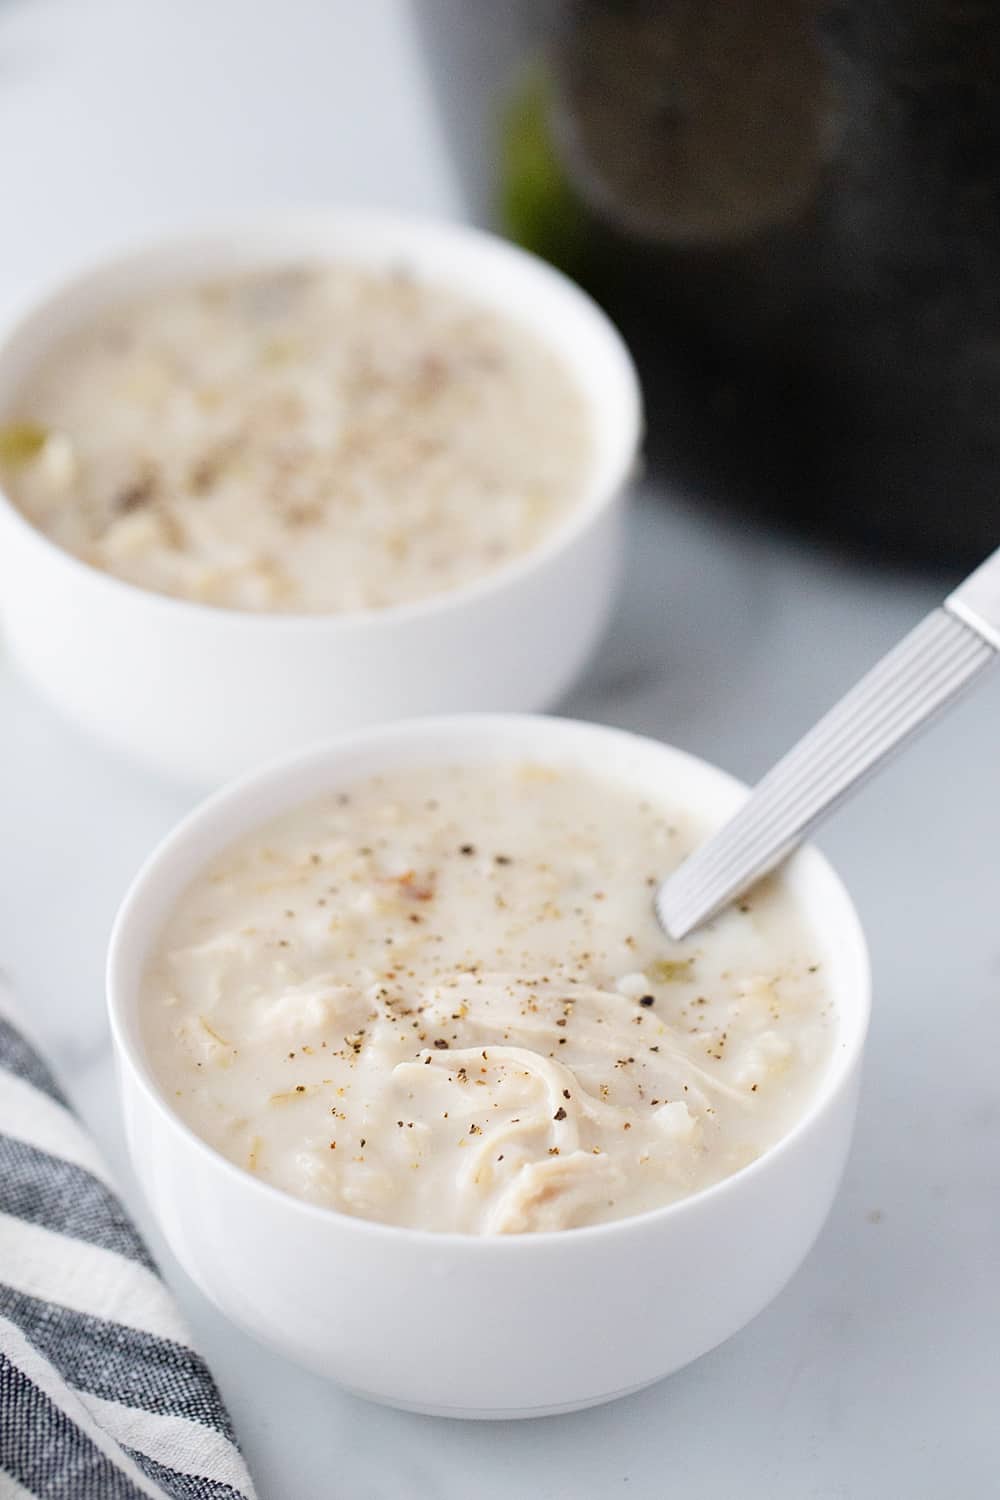 Creamy Chicken and Rice Soup - Creamy chicken and rice soup is a hearty meal with simple ingredients like brown rice, celery, onion, and chicken. Total family favorite! #halfscratched #soup #souprecipe #chickensoup #ricesoup #easyrecipe #maindish